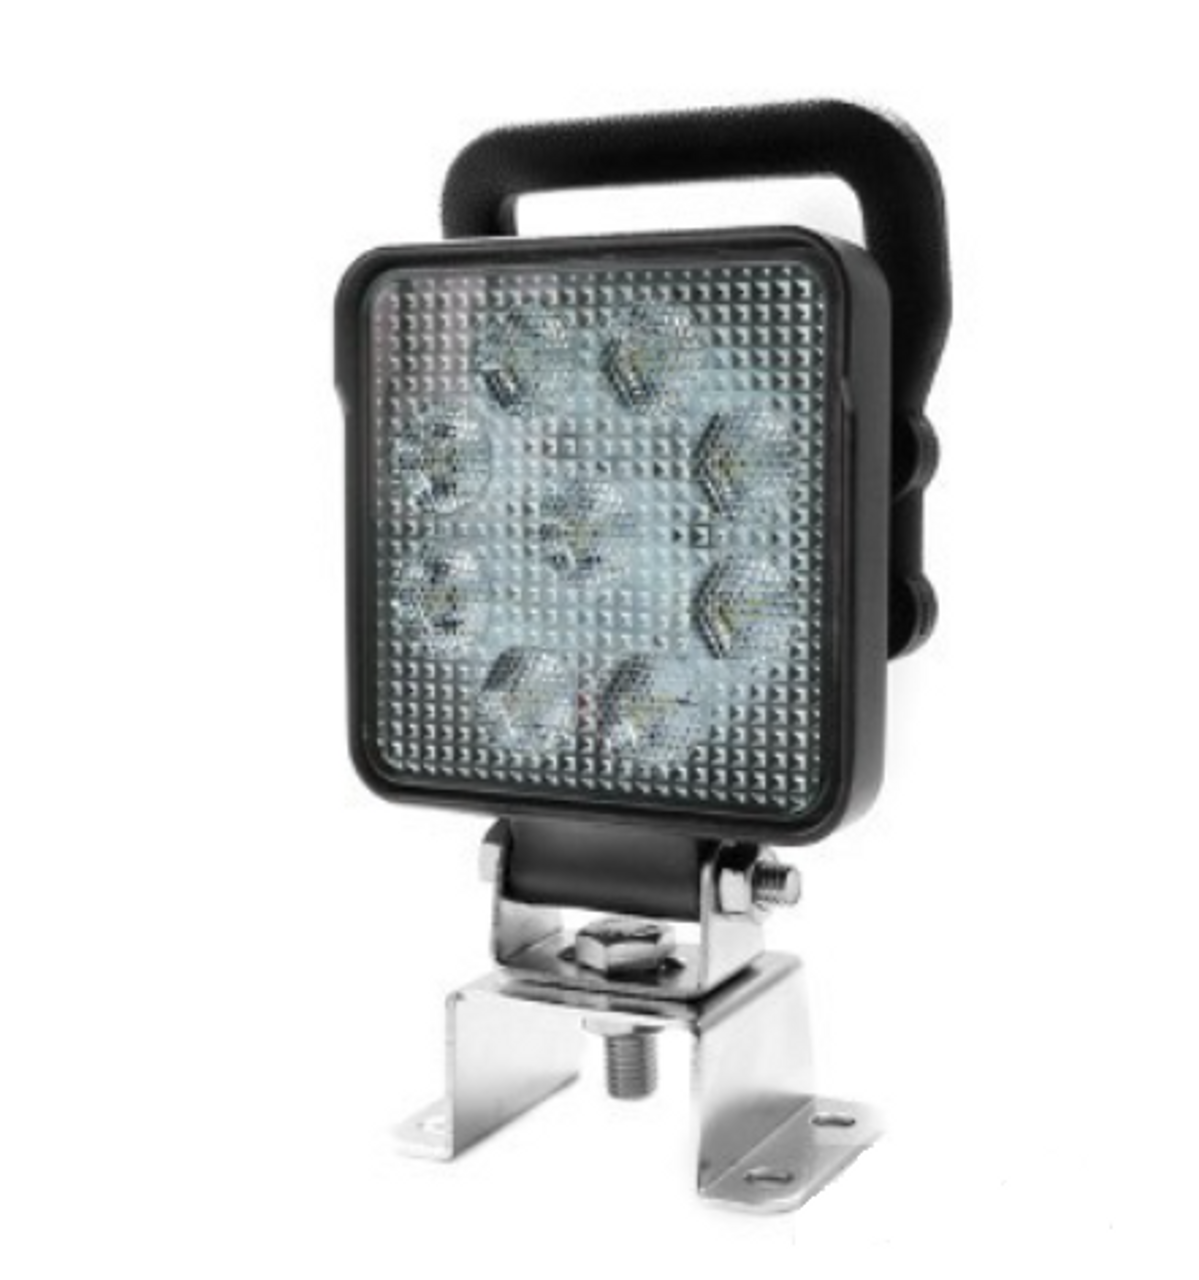 RWL814FHS - LED Work Light. Square Flood Beam with Handle and Switch. Multi-Volt 10-30v 14W. Super Low Currant Draw. Water and Dust Proof. RV. Ultimate LED. 